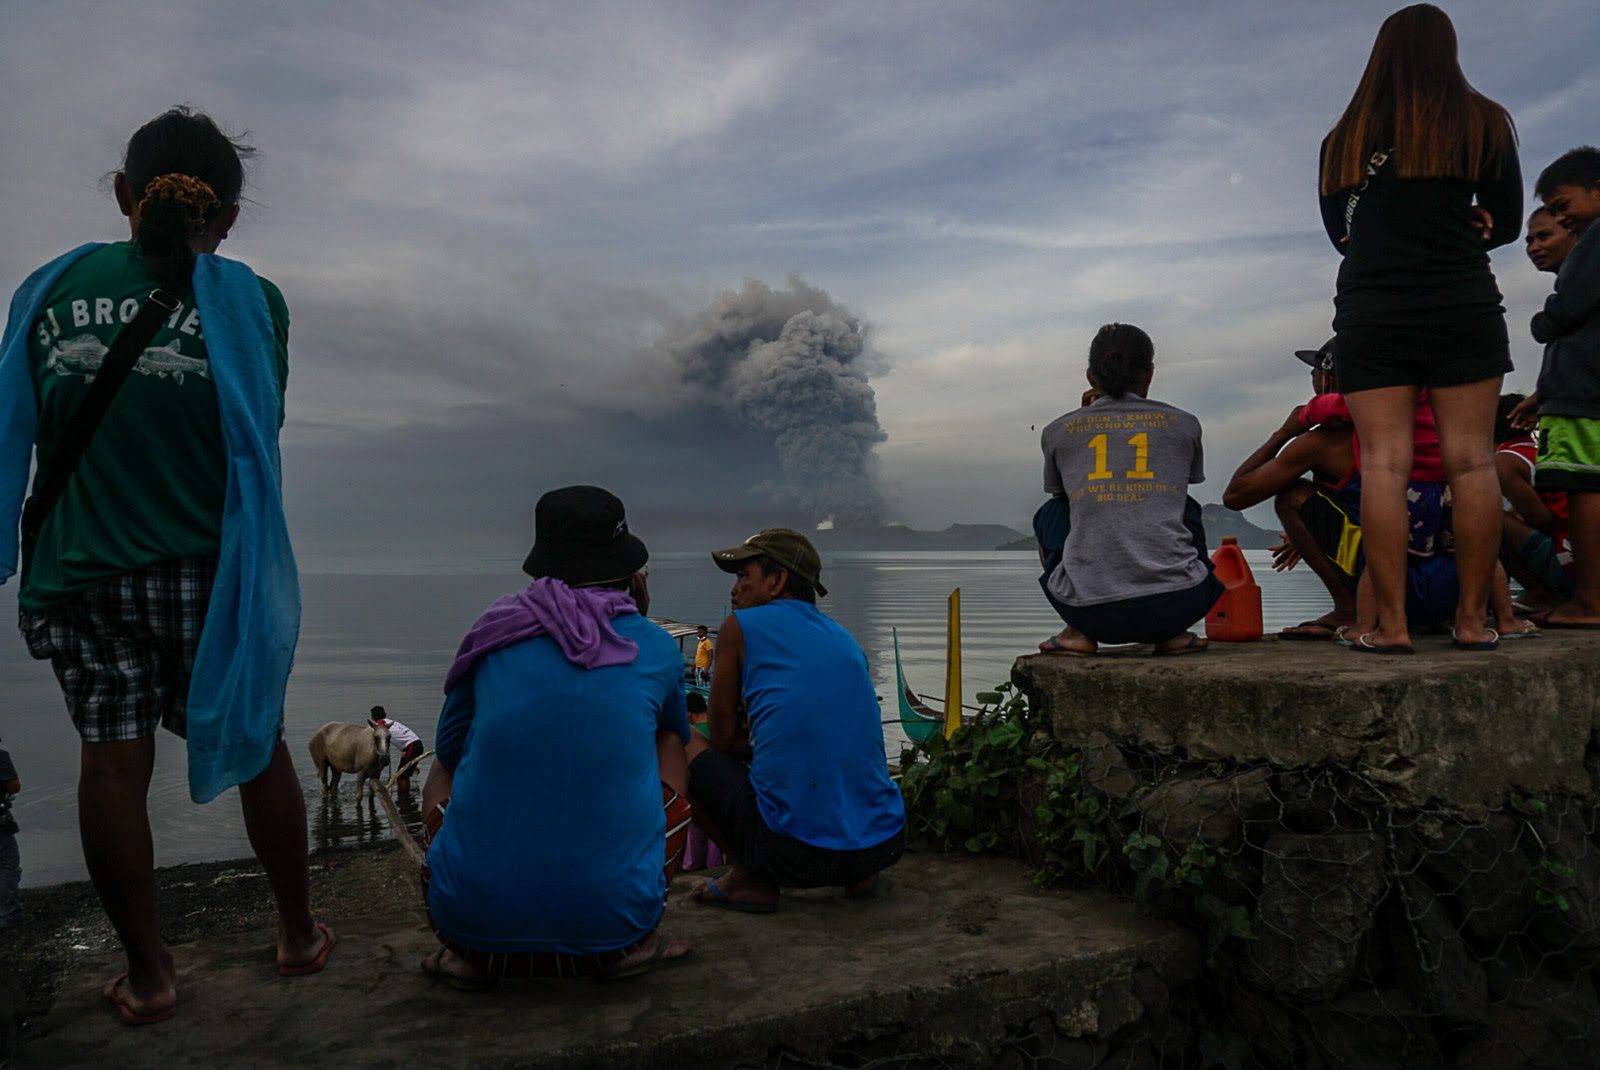 Amid Taal Volcano’s eruption, the hard questions